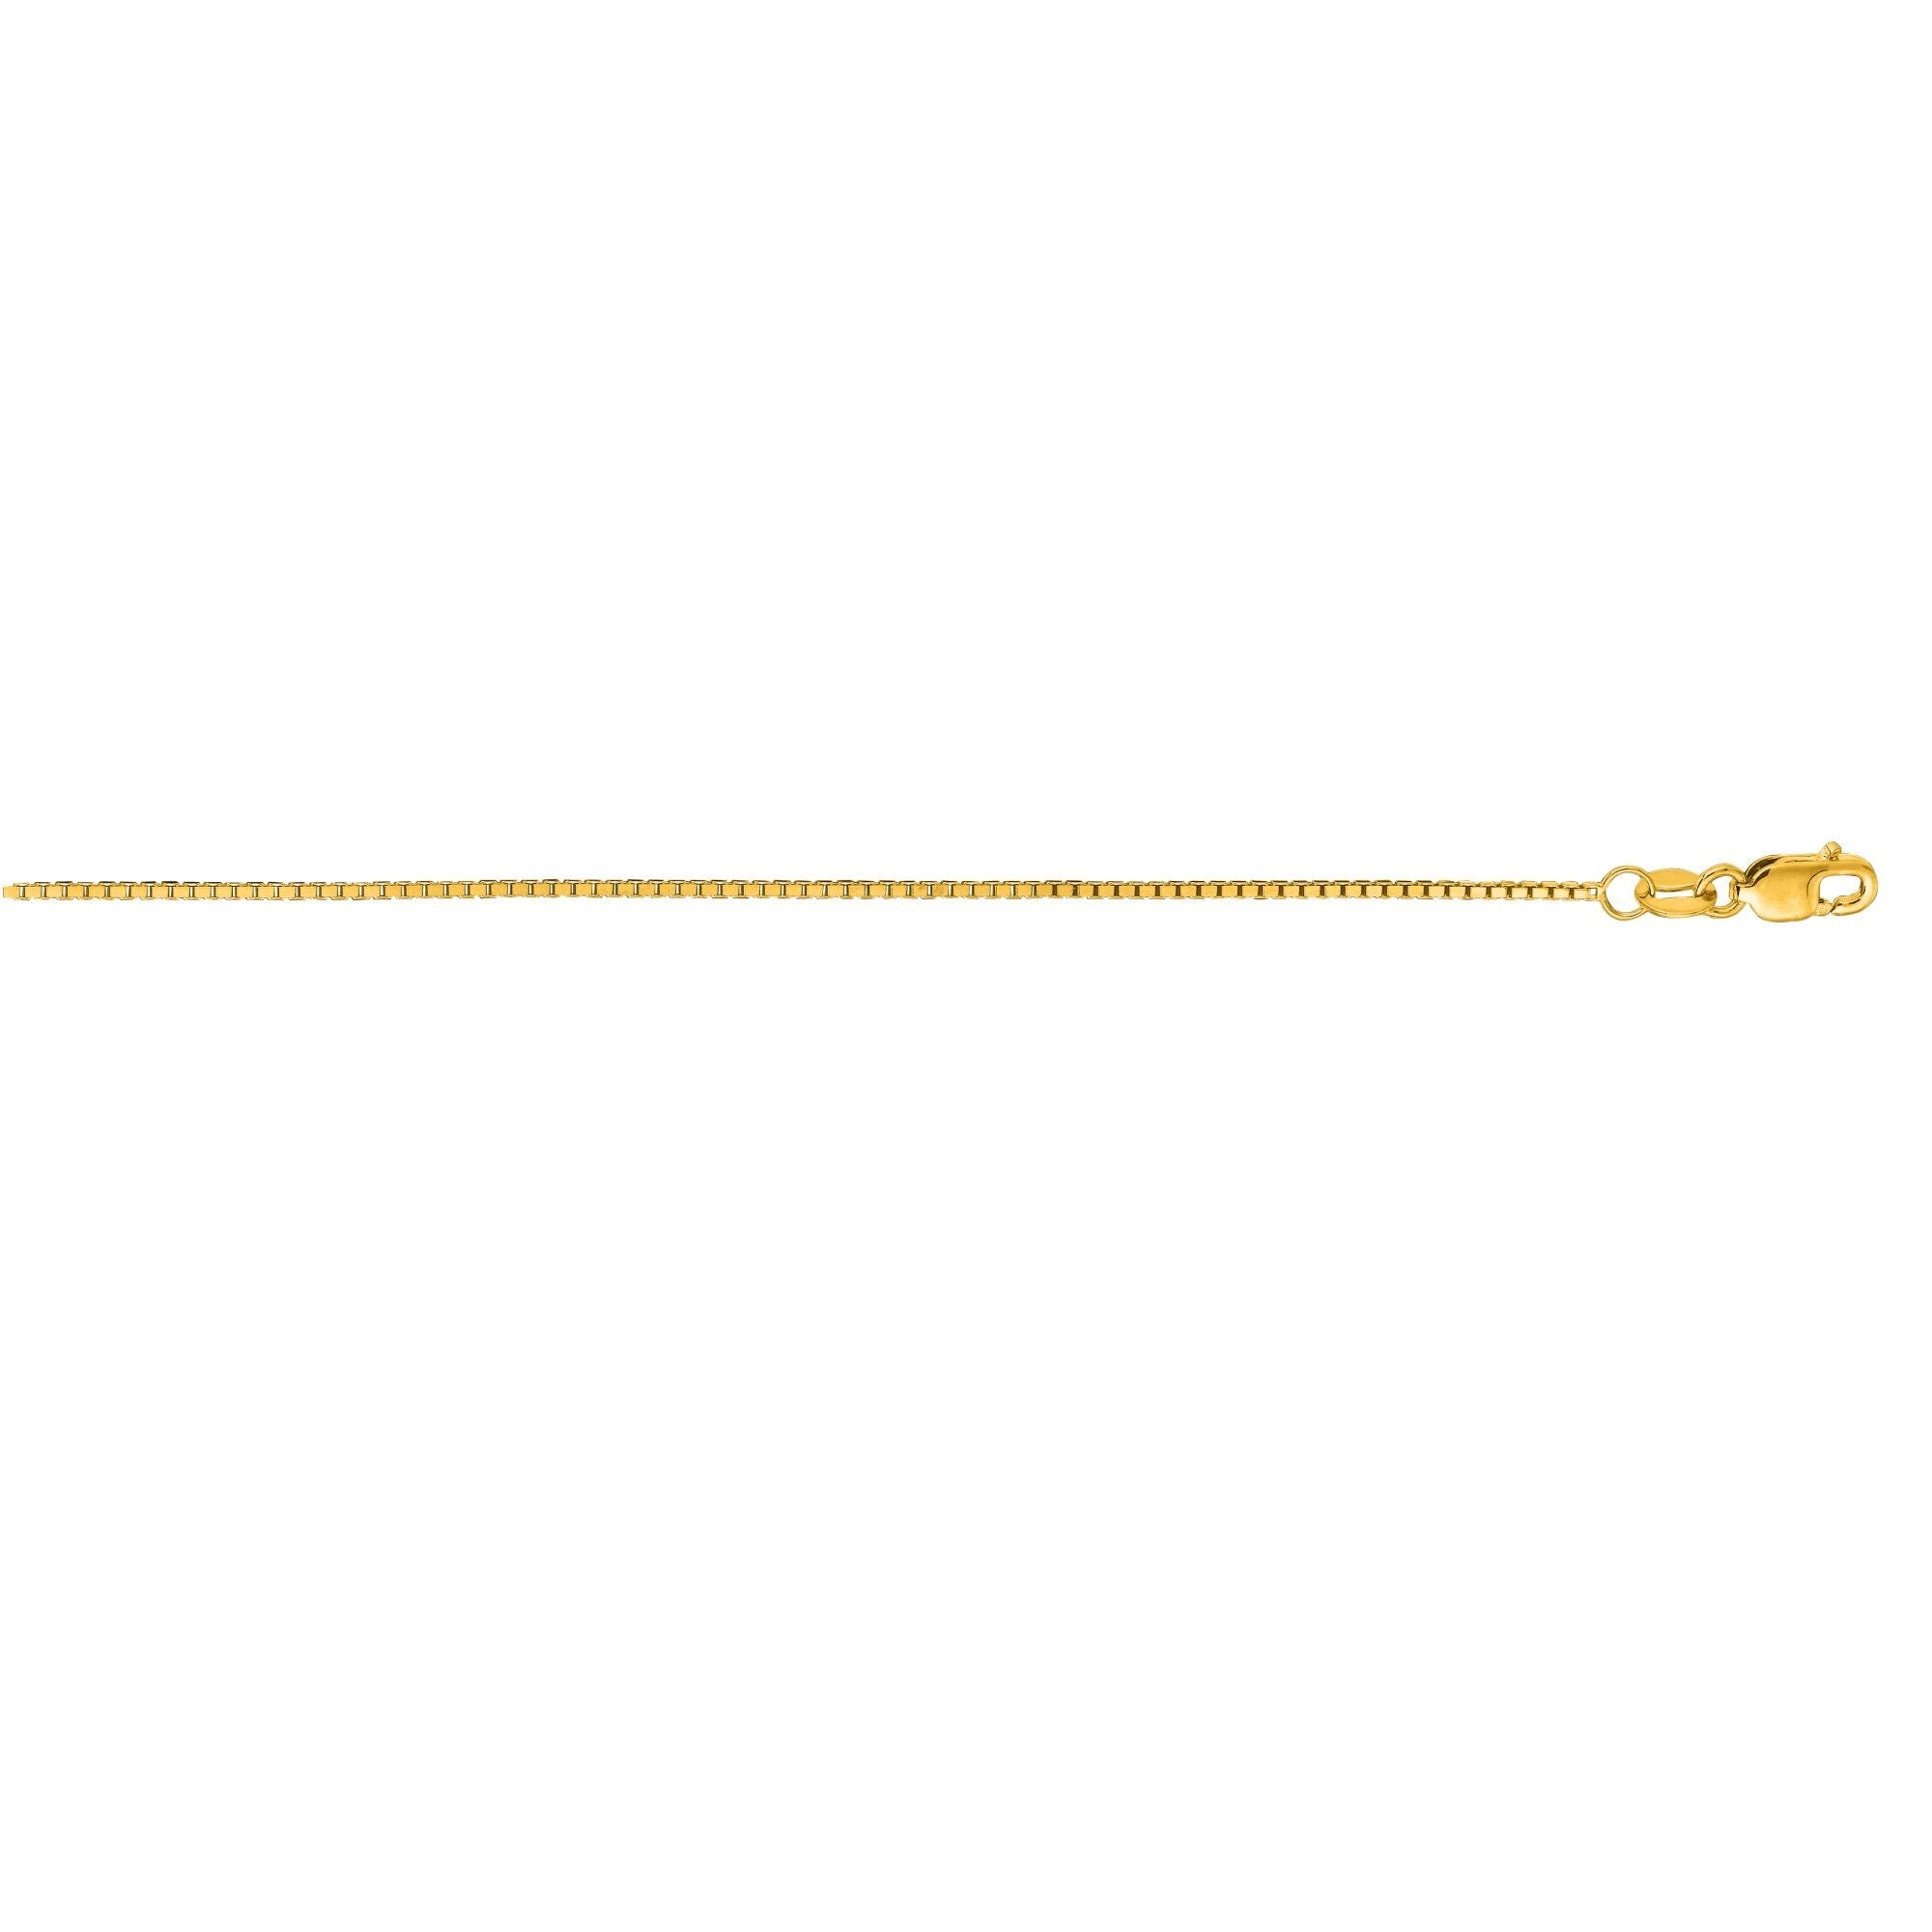 Minimalist Solid Gold Octagonal Box Chain 1mm Thick Mens' Chain - wingroupjewelry